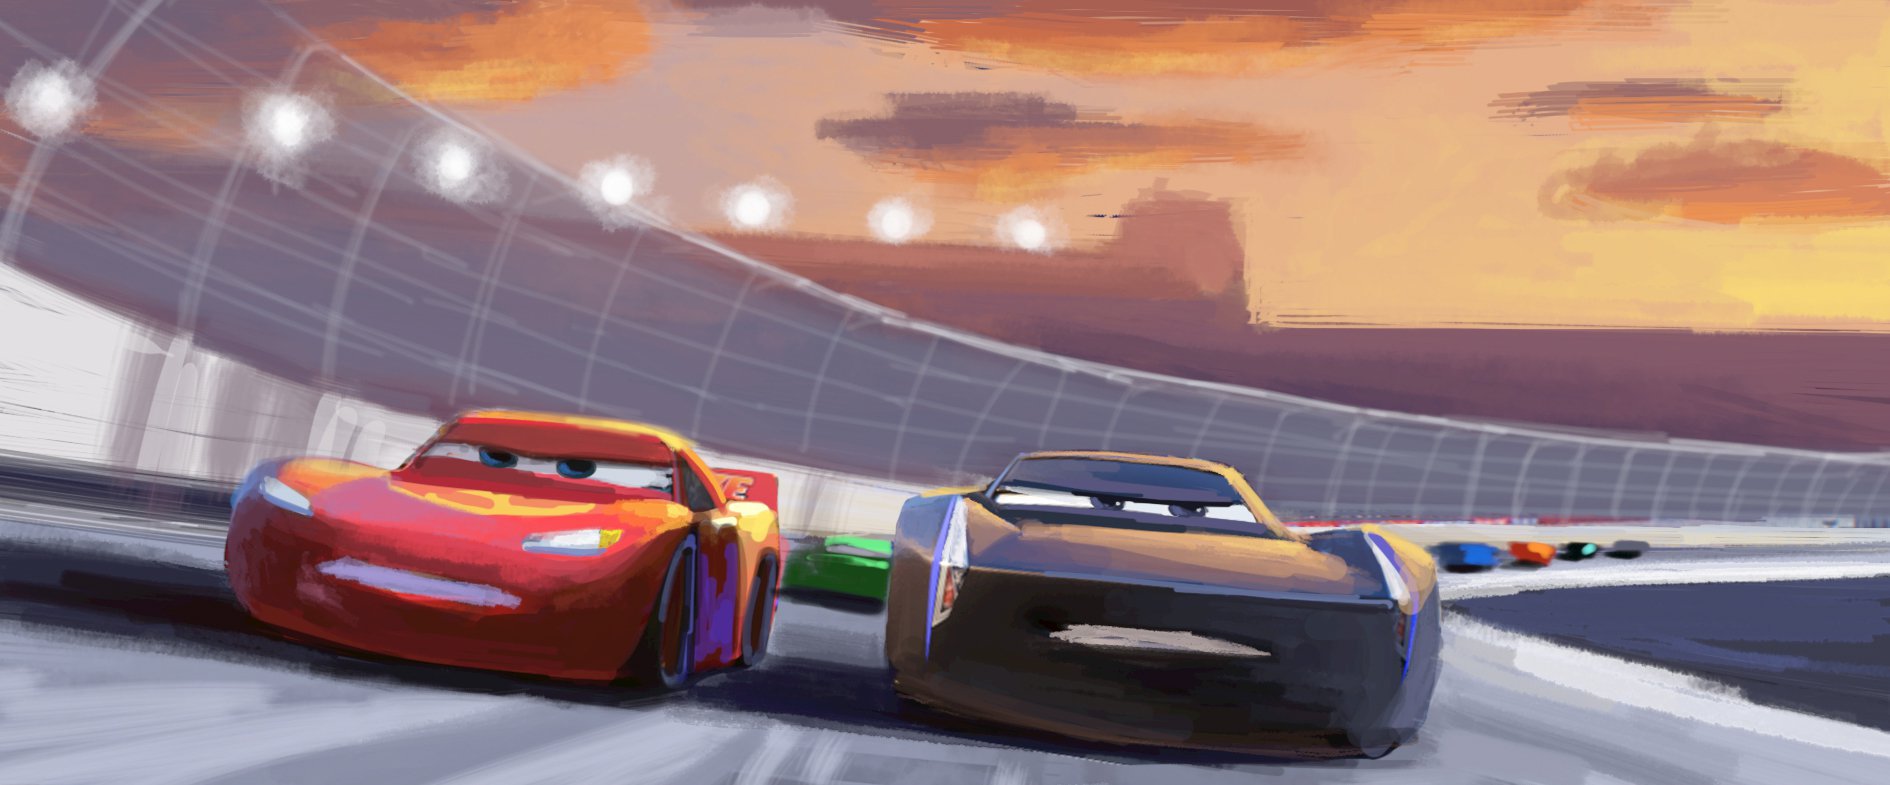 [ART BOOK REVIEW] 'The Art of Cars 3'